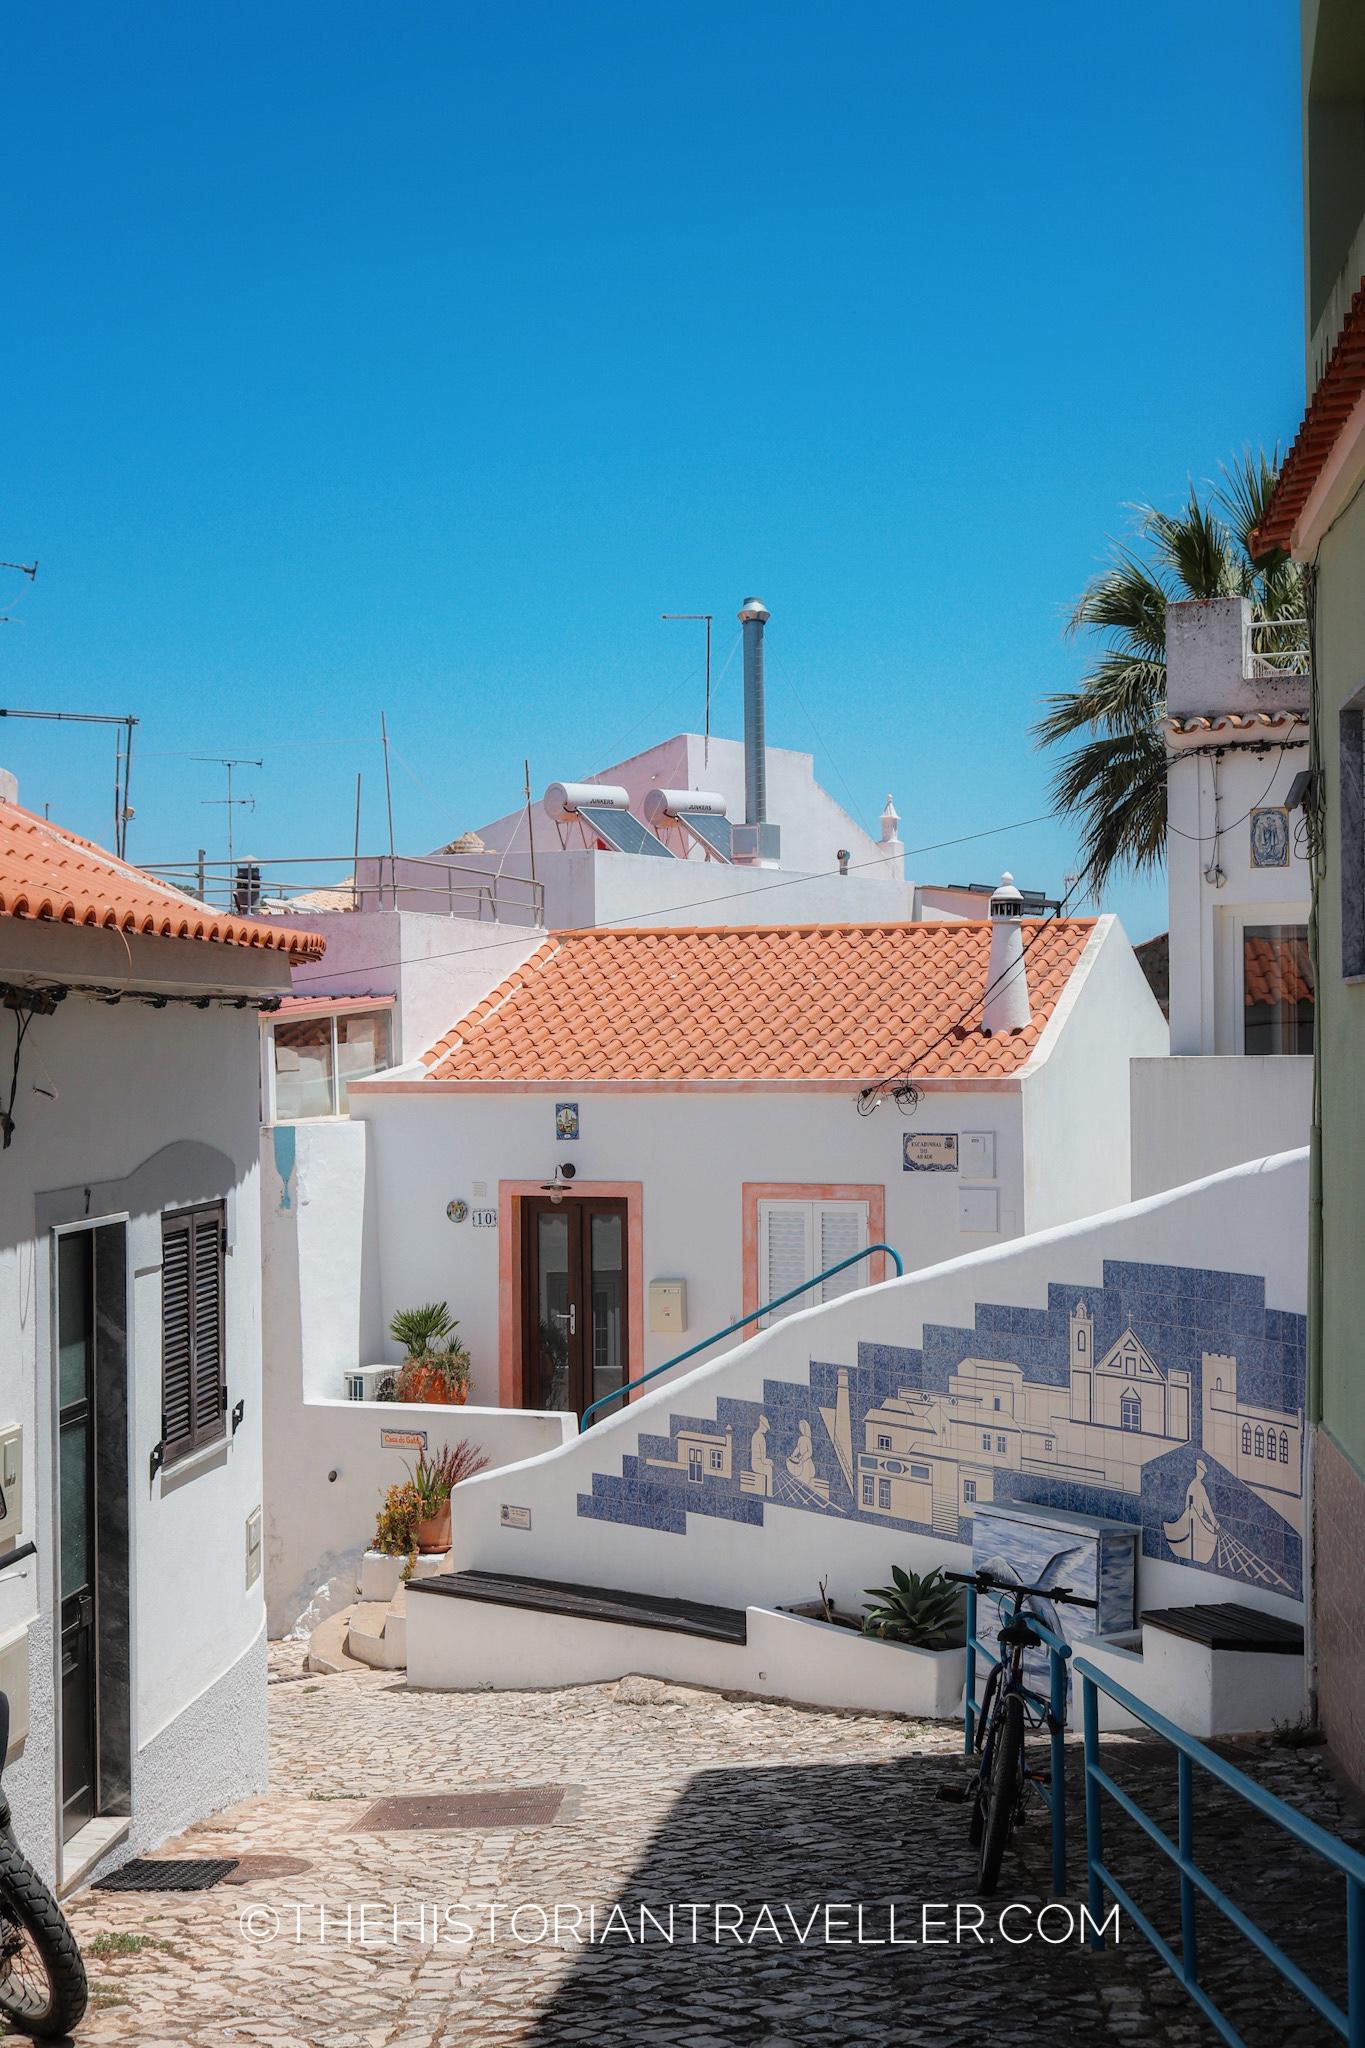 One of the alleys of Ferragudo with an azulejo tile work